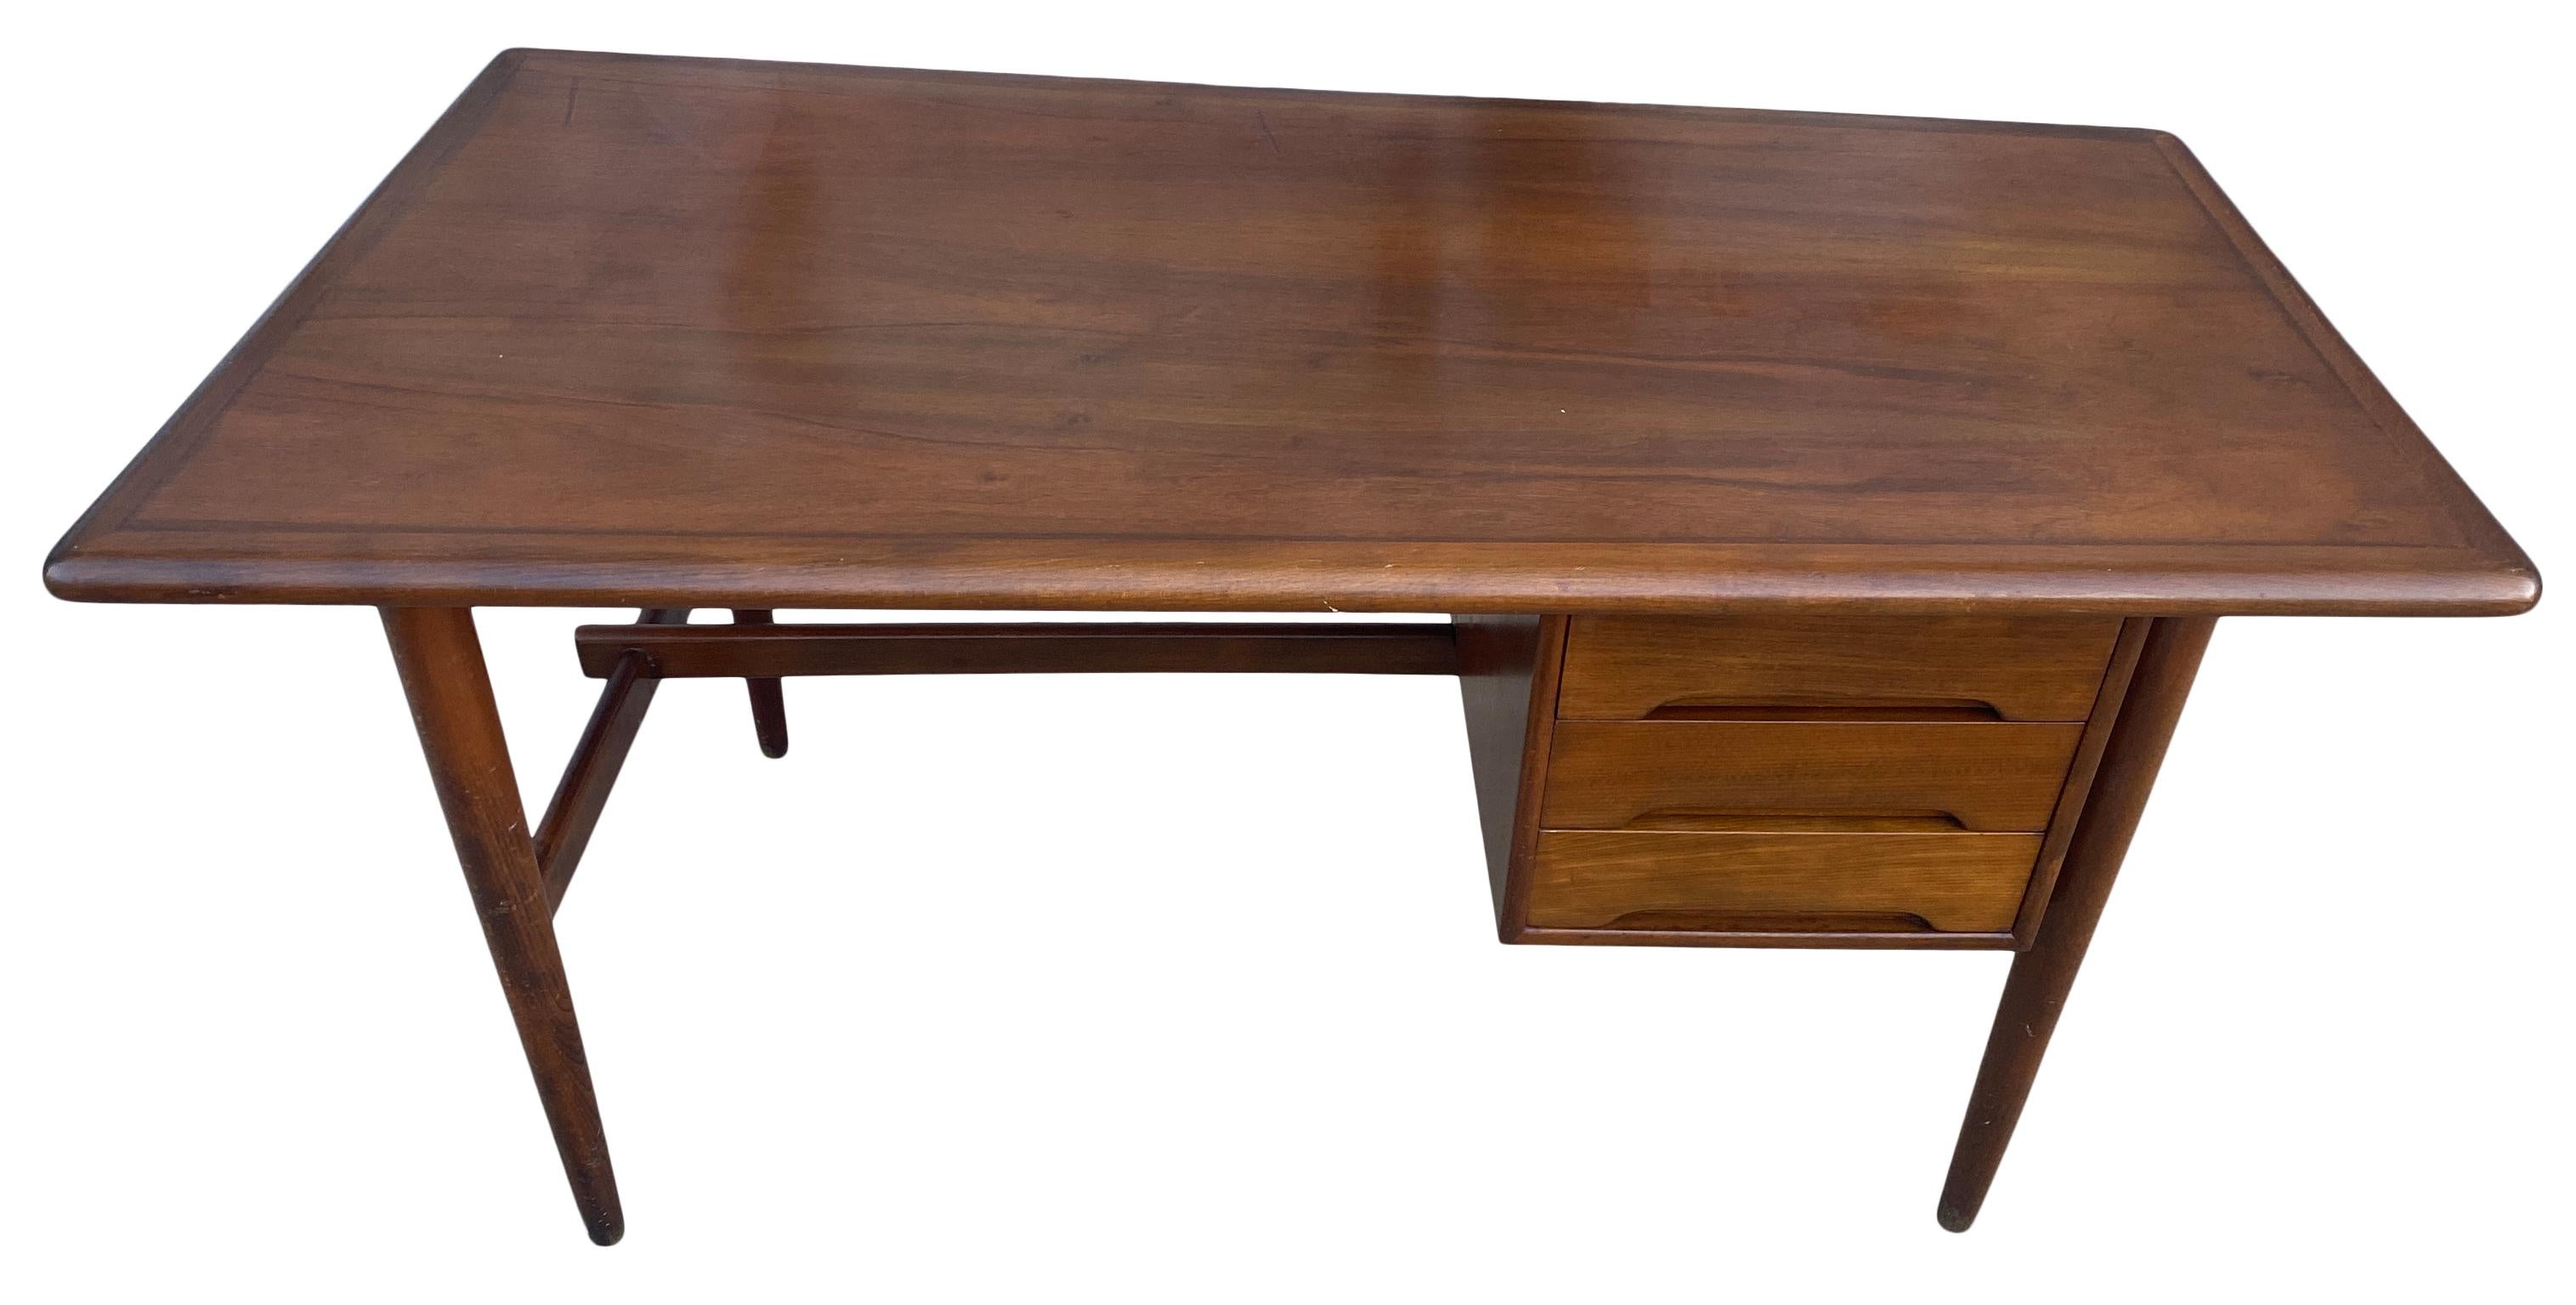 Great vintage midcentury Danish modern writing desk 3 drawer Denmark asymmetrical top. Stunning Danish design with round tapered legs and a lower crossbar. Labeled, made in Denmark. Solid wood desk. Beautiful design. Shows some wear on top surface.